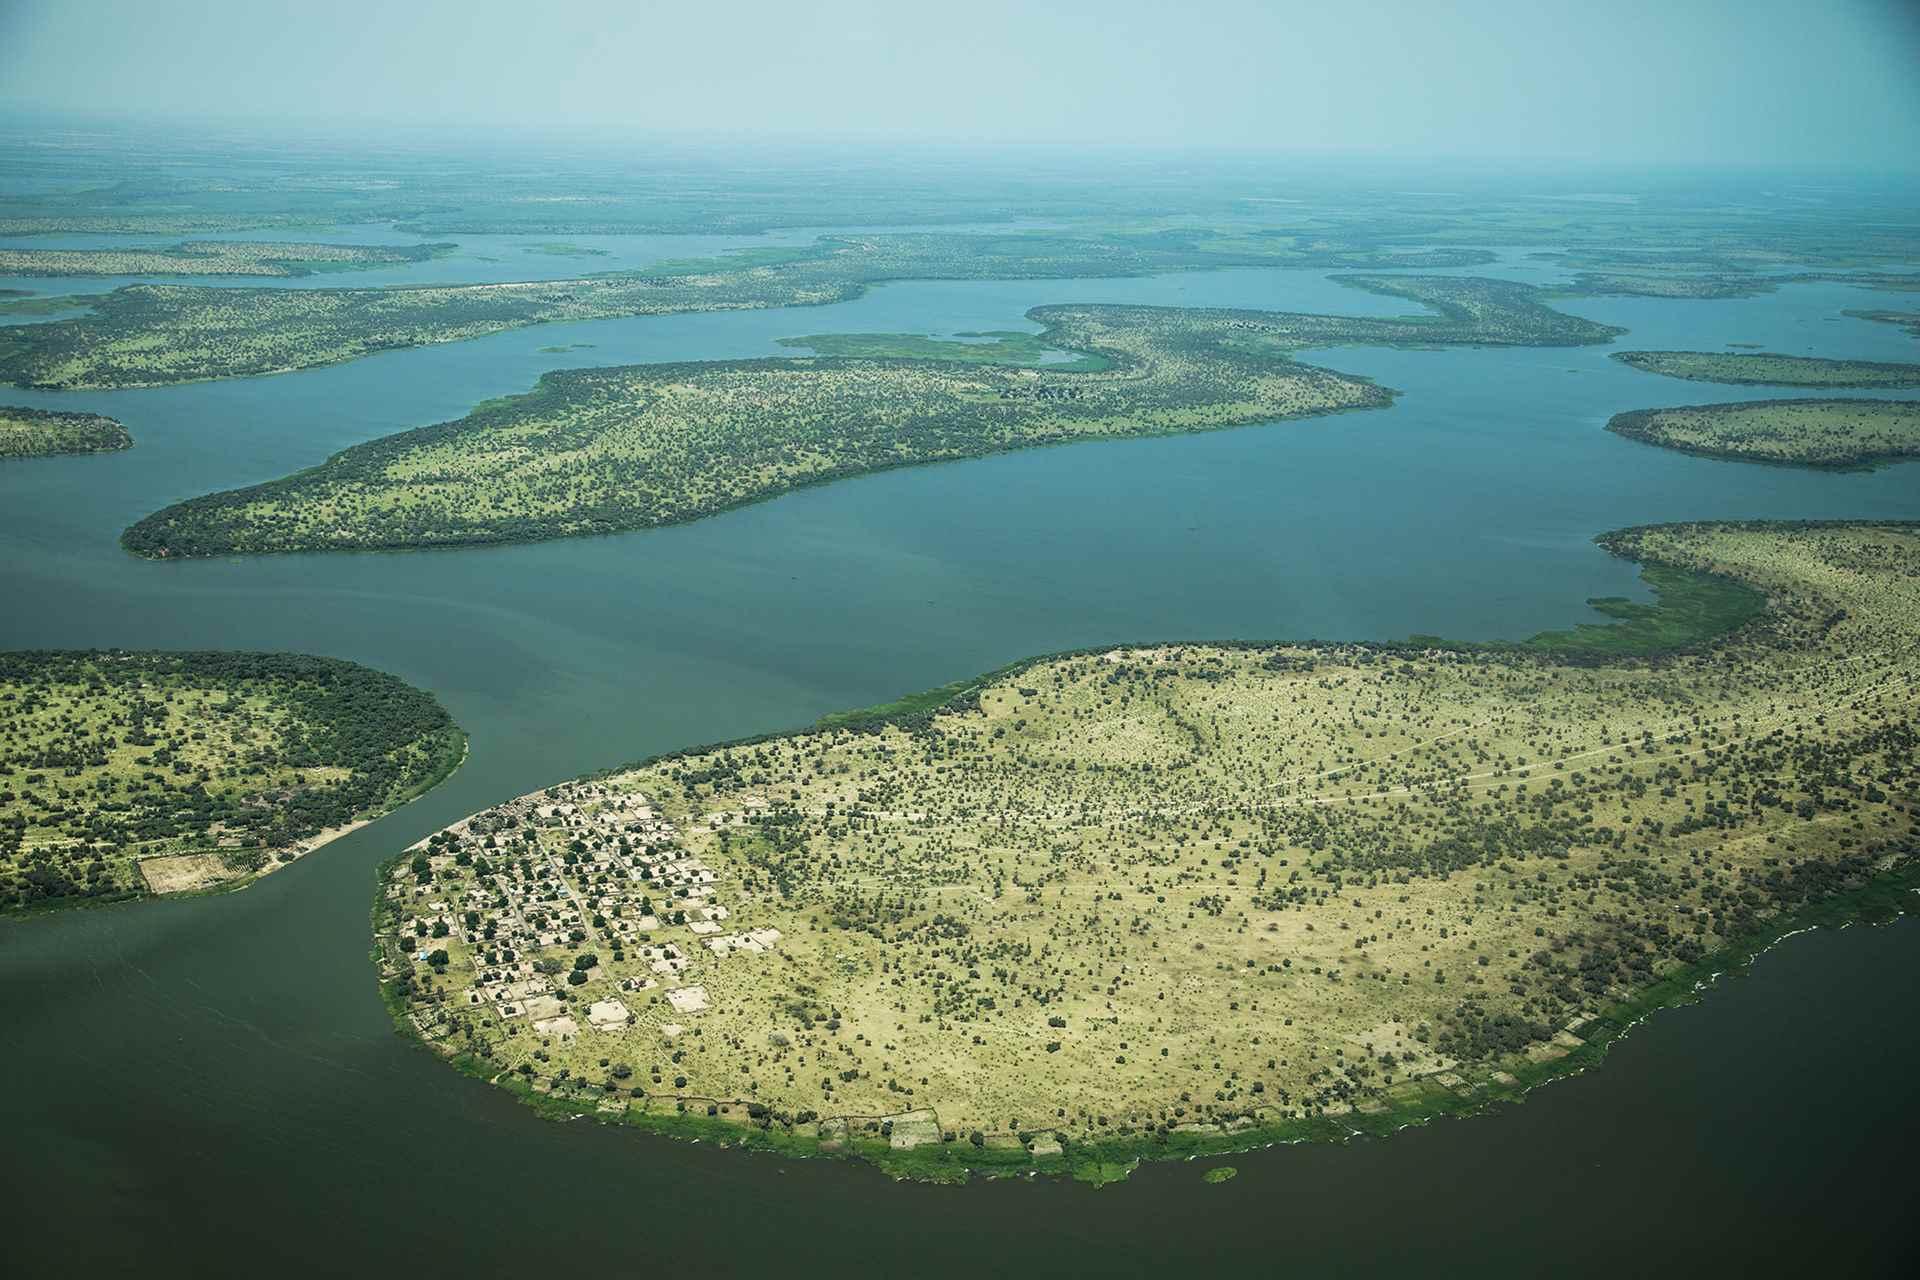 Battle For Control Of Lake Chad Islands, Resources - HumAngle